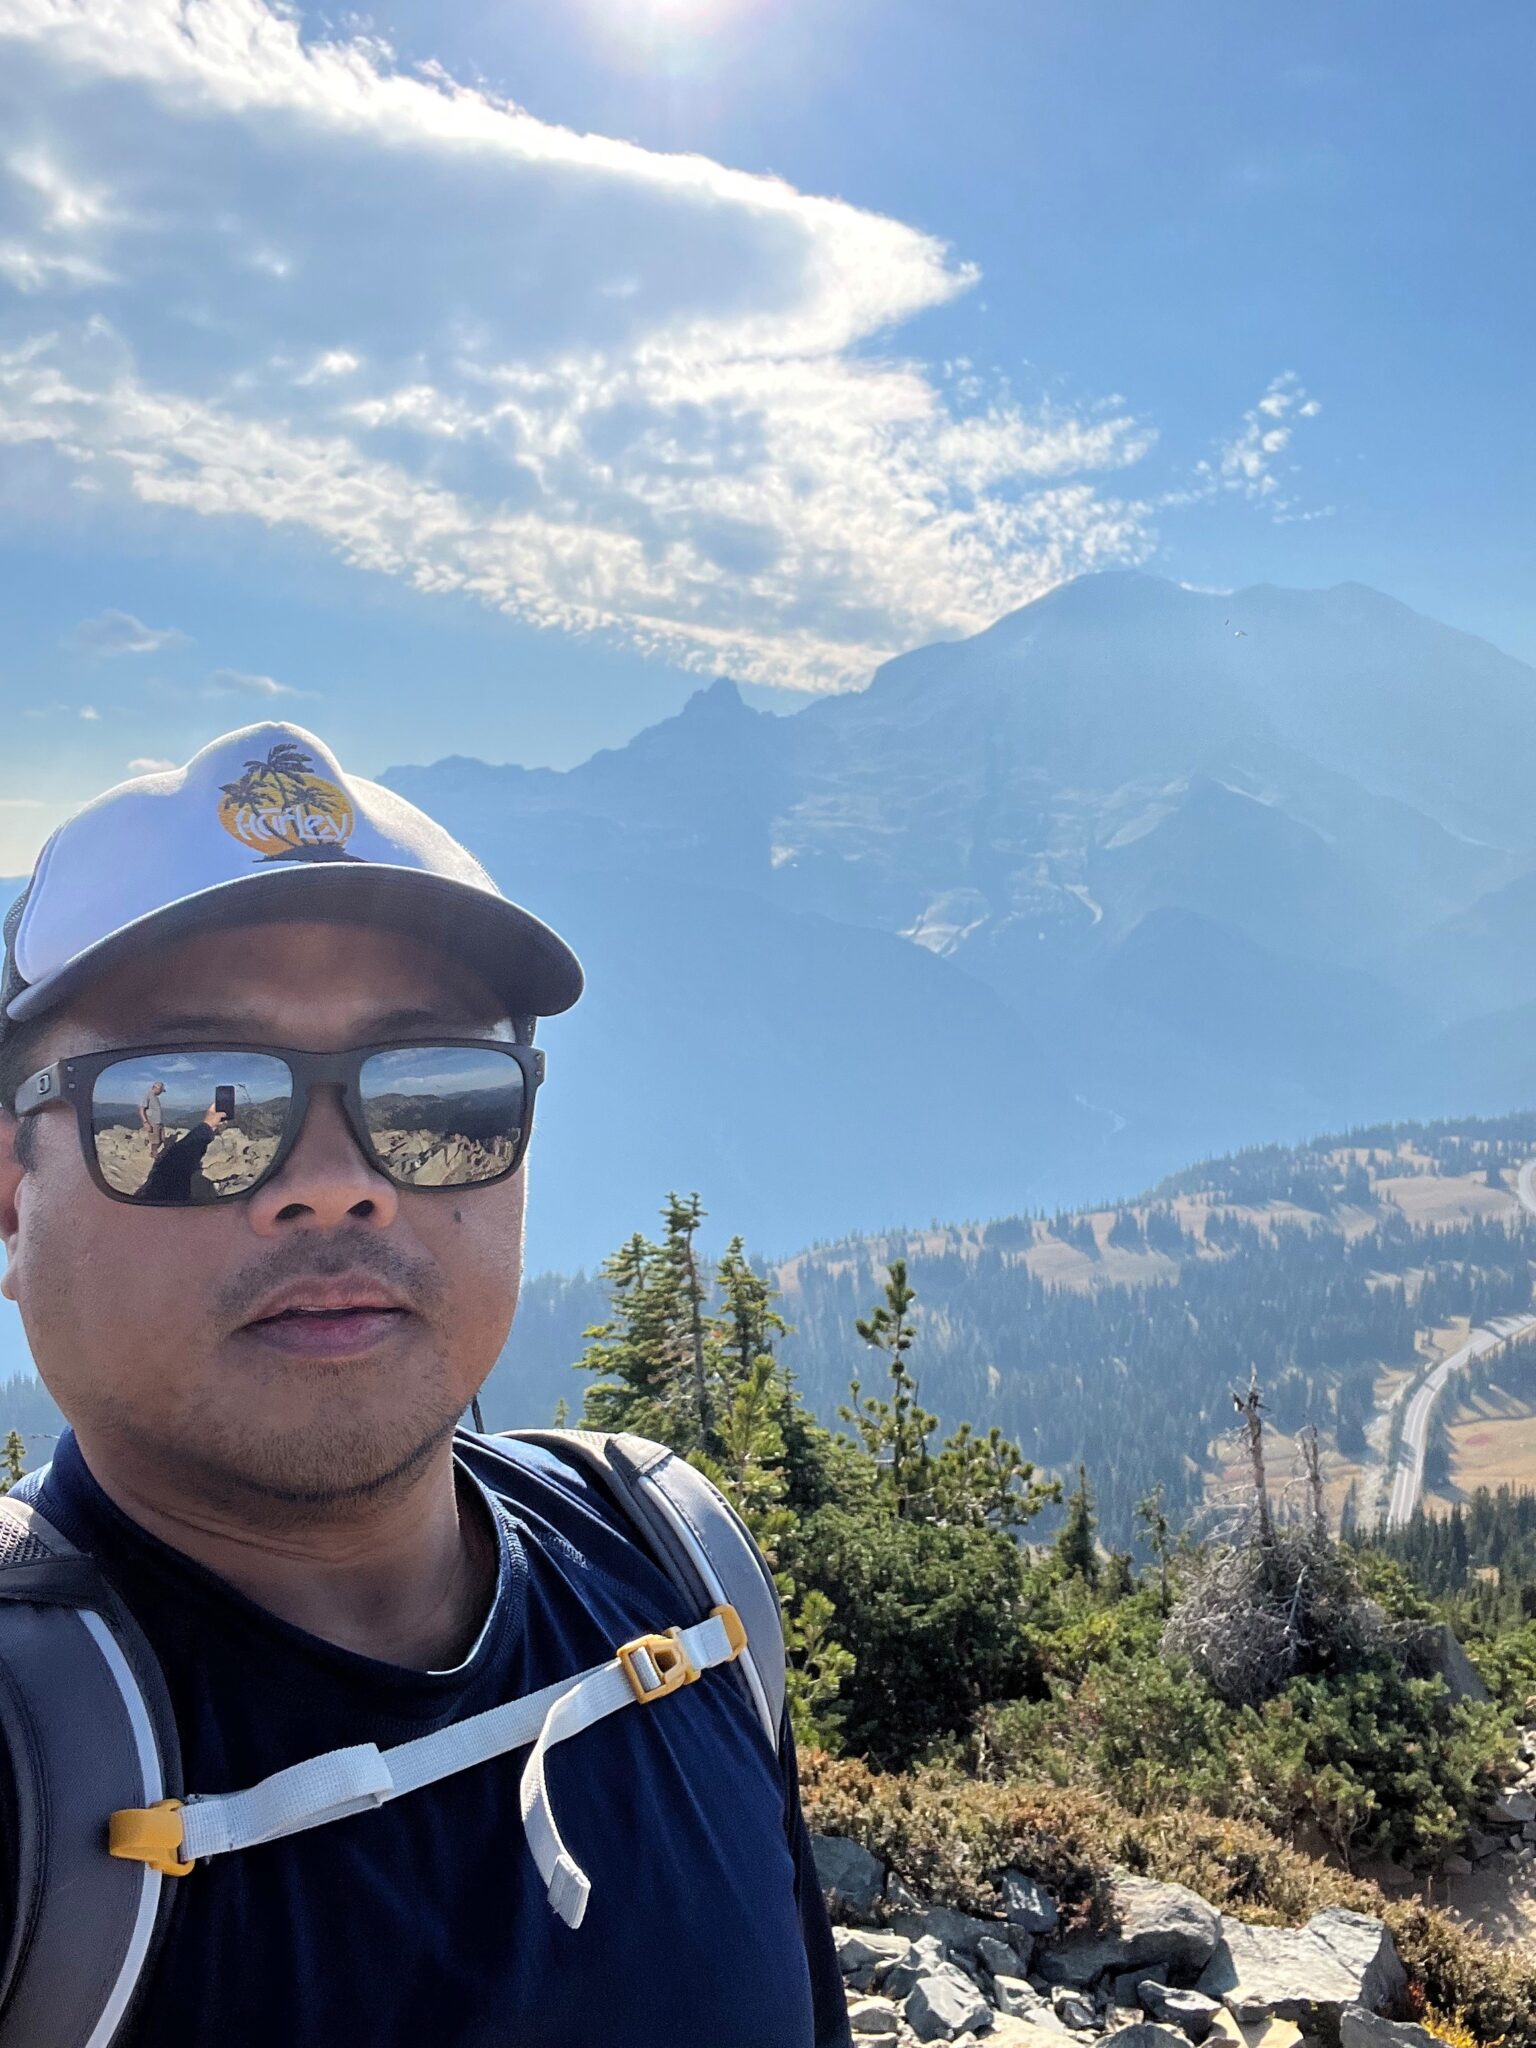 Selfie of Edwin Obras with clouds, distant landscape, and Mount Rainier in the background during a hike.